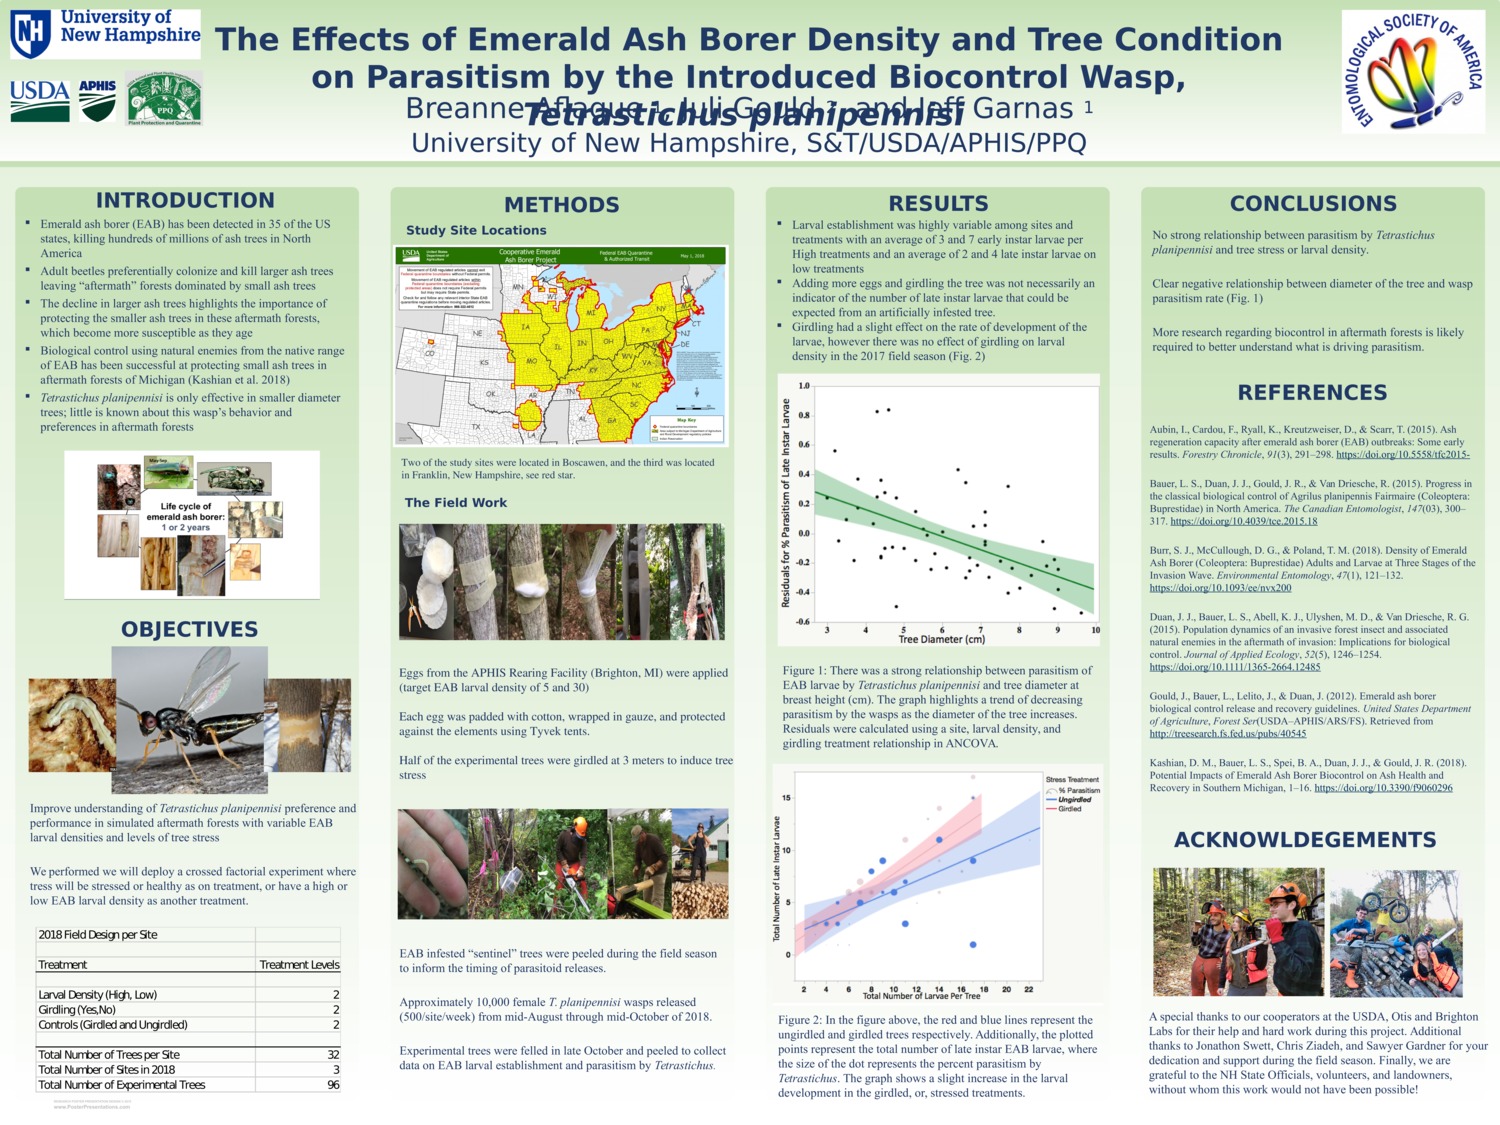 The Effects Of Emerald Ash Borer Density And Tree Condition On Parasitism By The Introduced Biocontrol Wasp, Tetrastichus Planipennisi  by bha1003